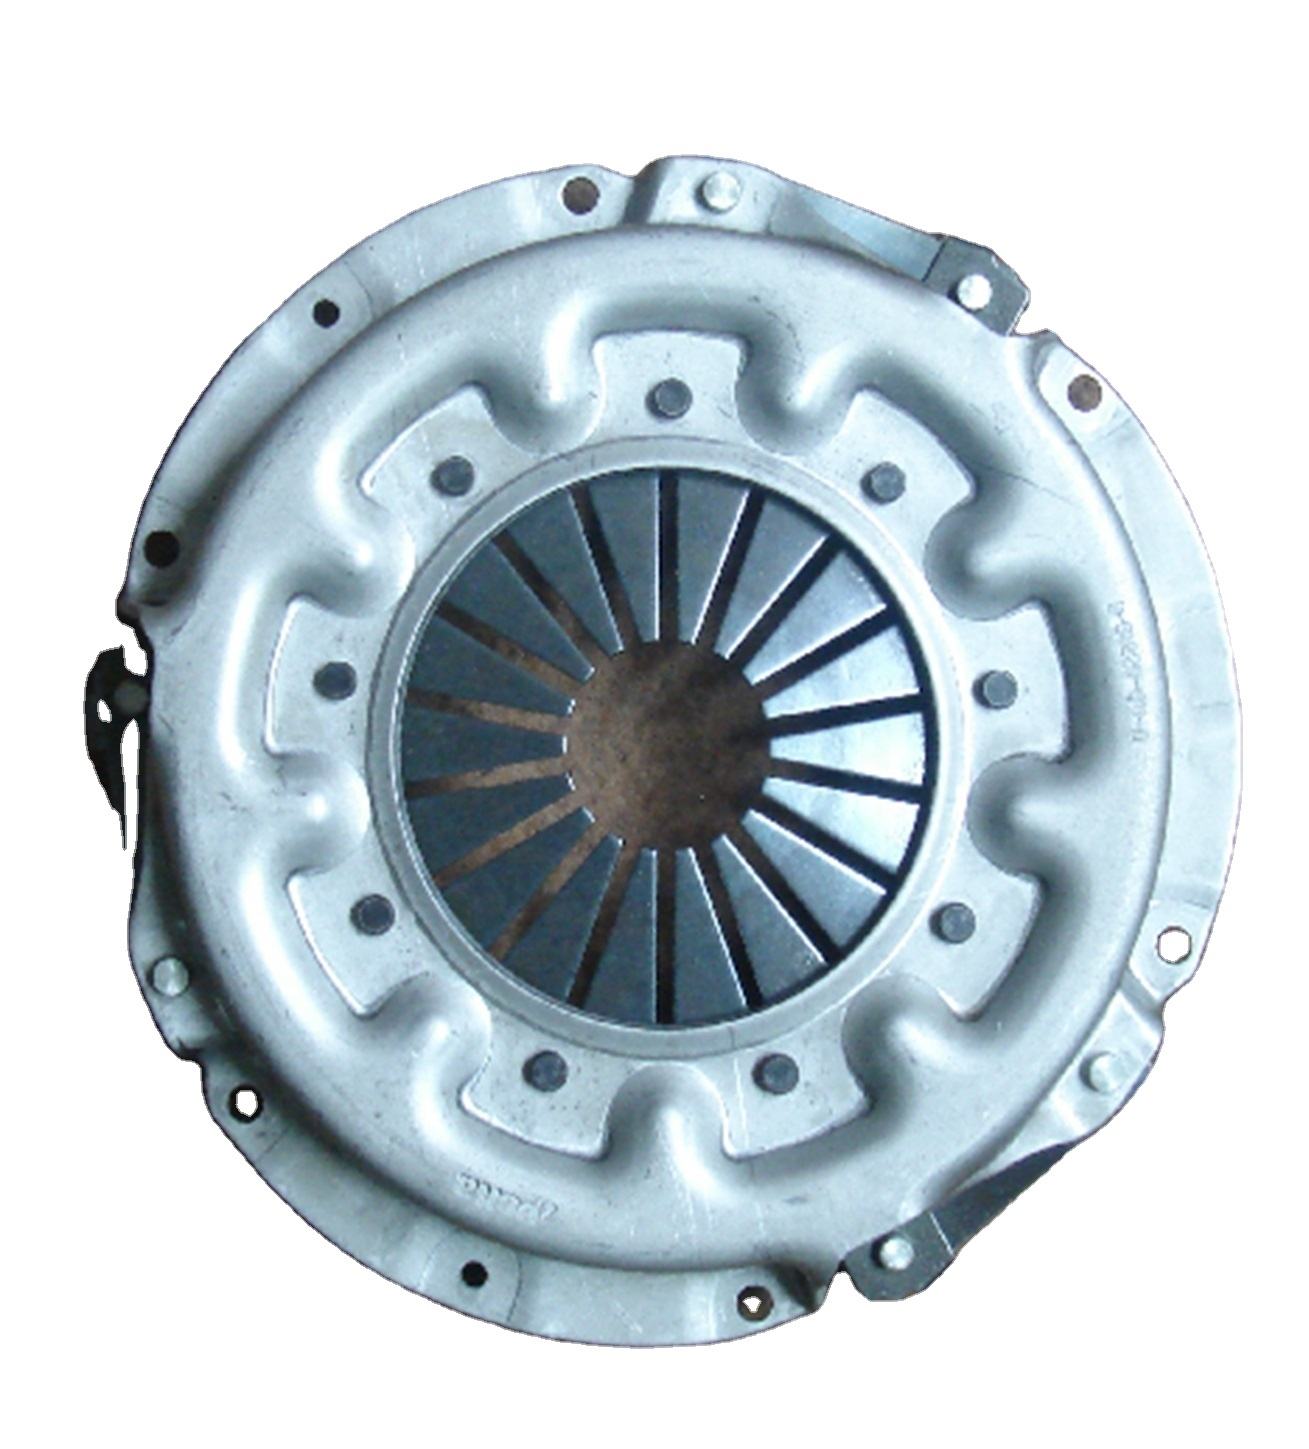 ISO/TS16949 Tractor clutch COVER B1501,